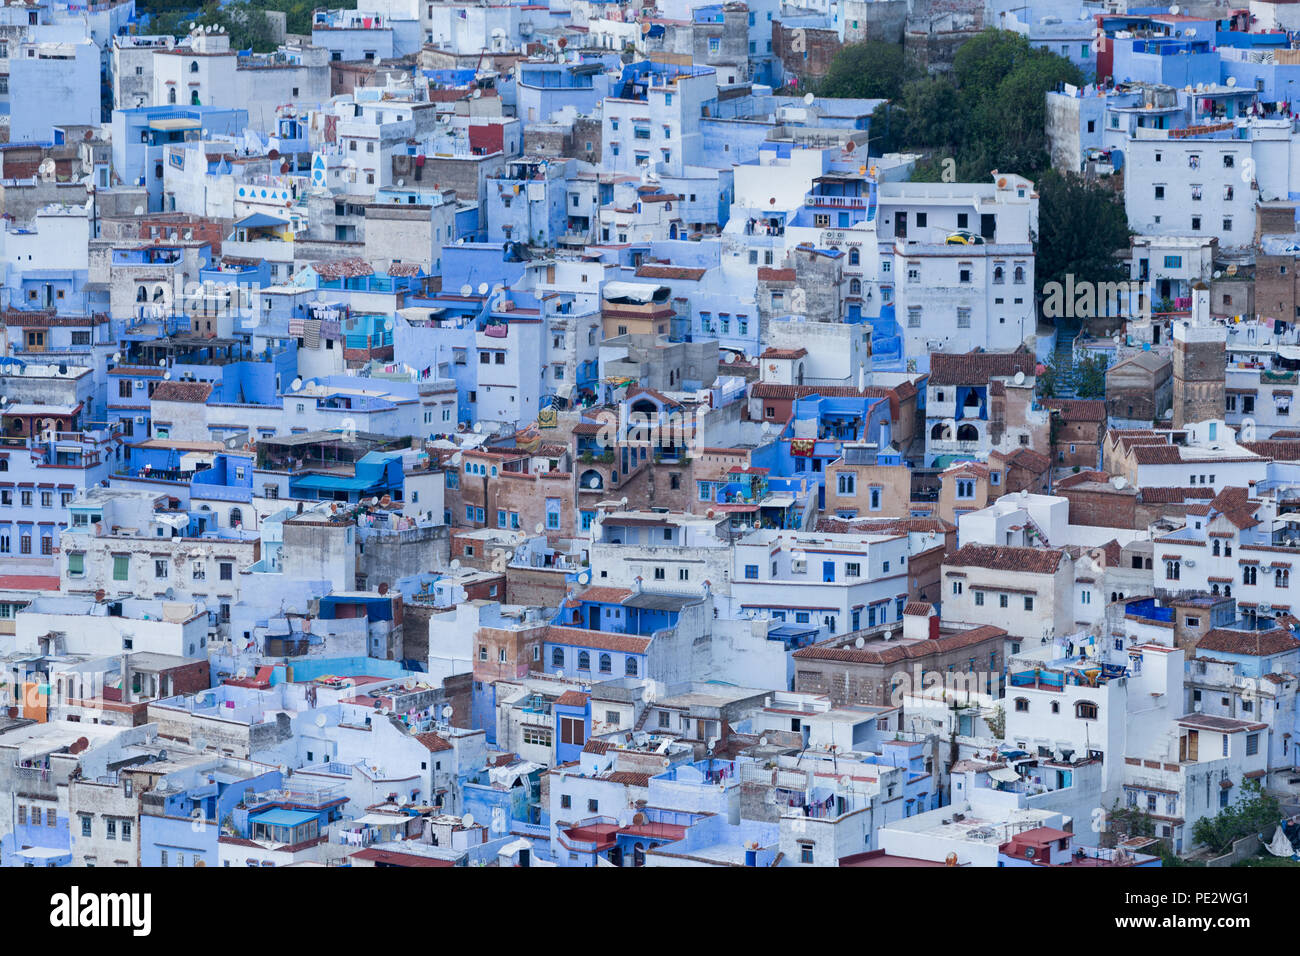 Chefchaouen (Chaouen) is a city in Morocco noted for its buildings in shades of blue. Stock Photo